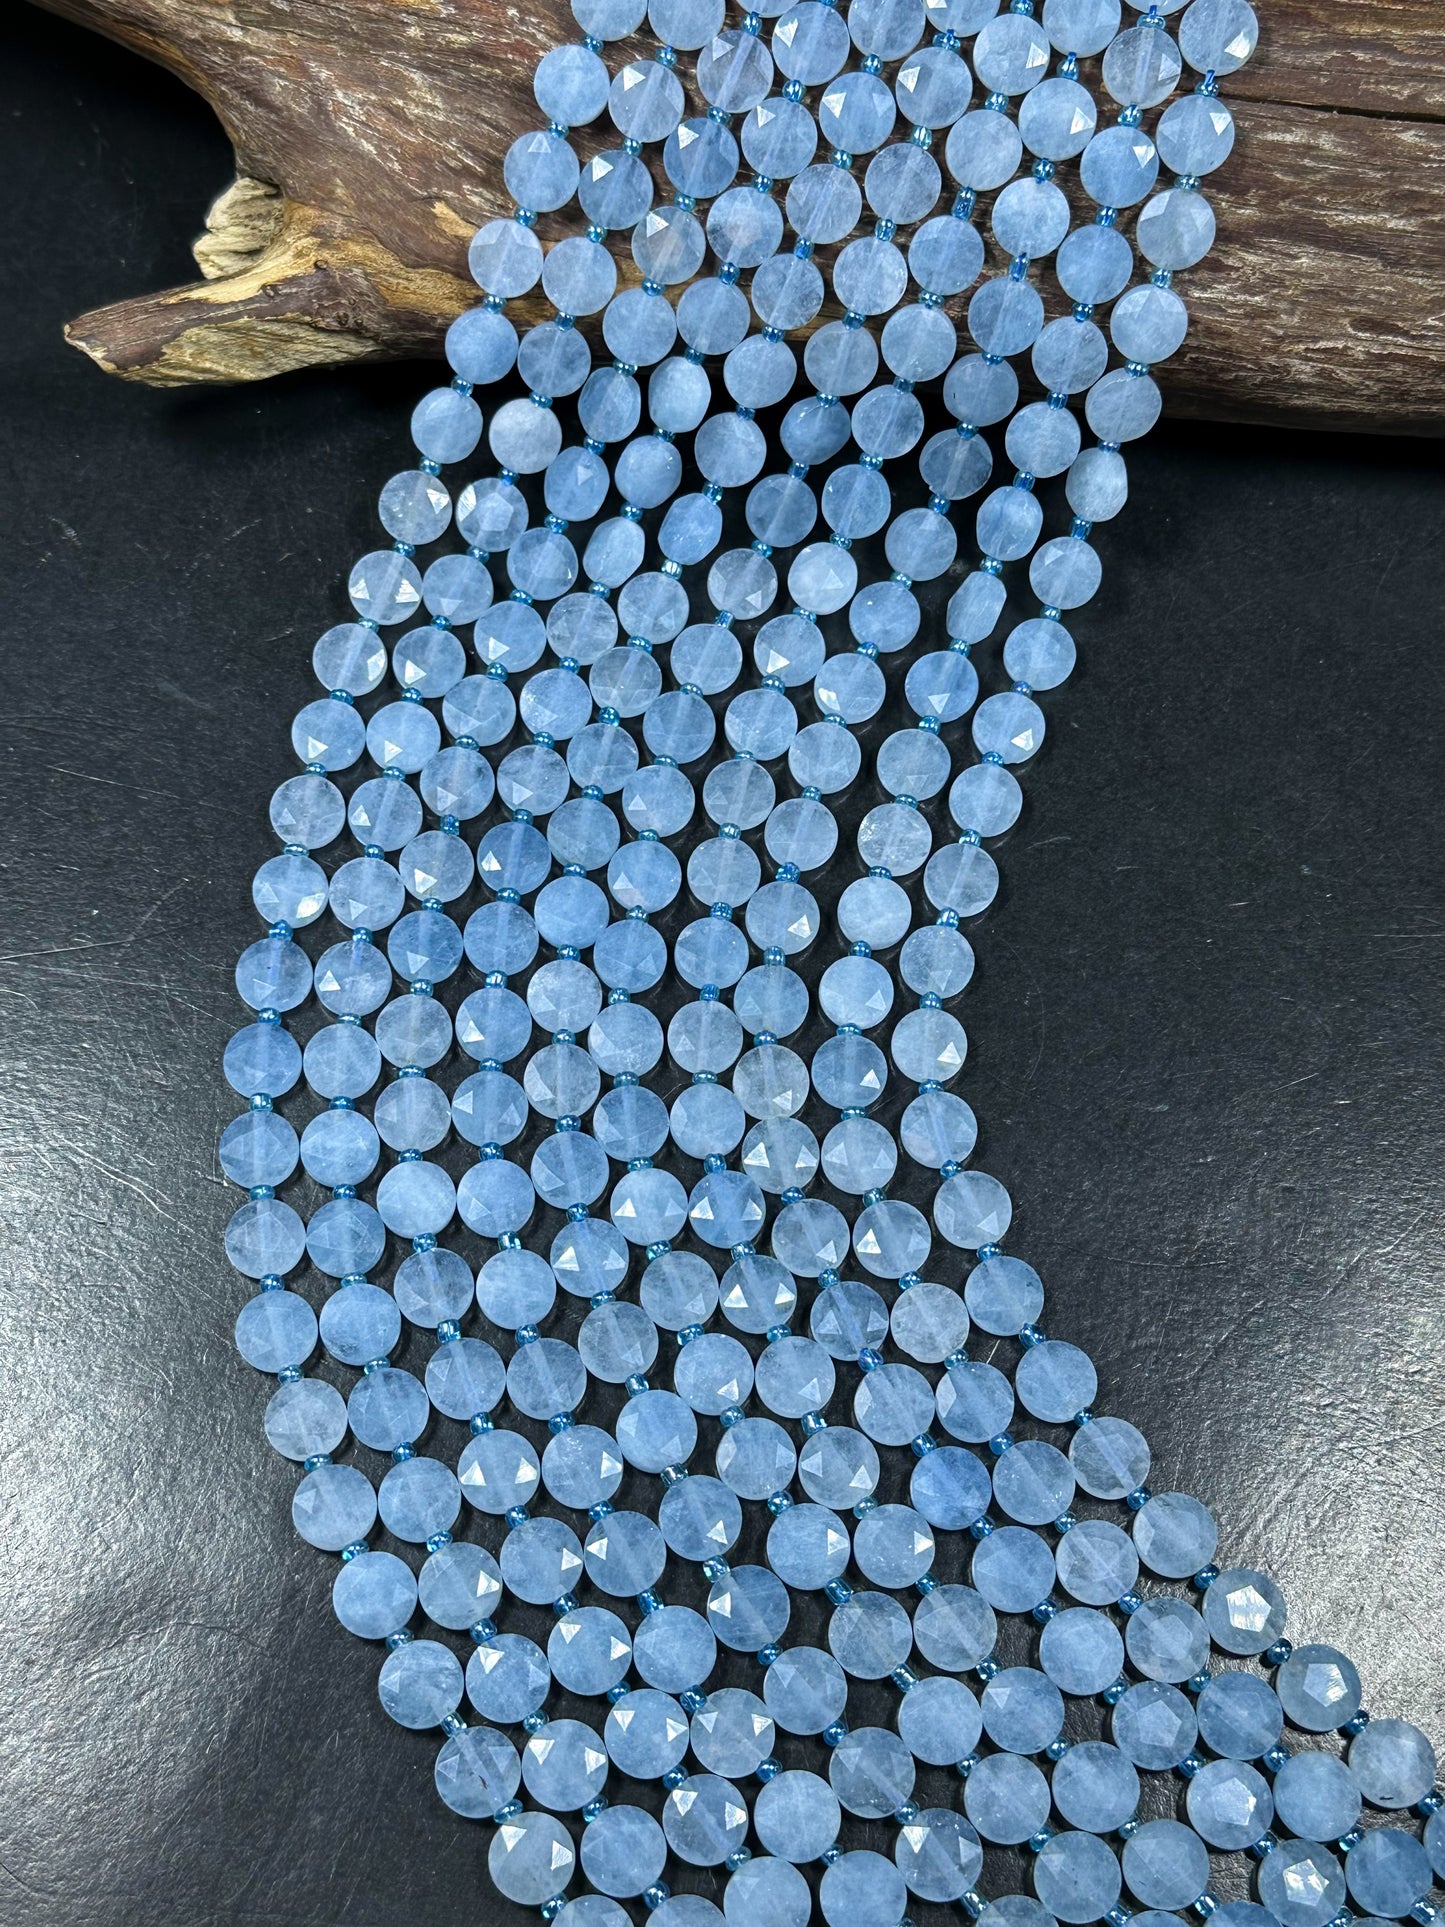 Natural Aquamarine Gemstone Bead Faceted 10mm Coin Shape Bead, Beautiful Natural Blue Color Aquamarine Beads, Great Quality 15.5" Strand